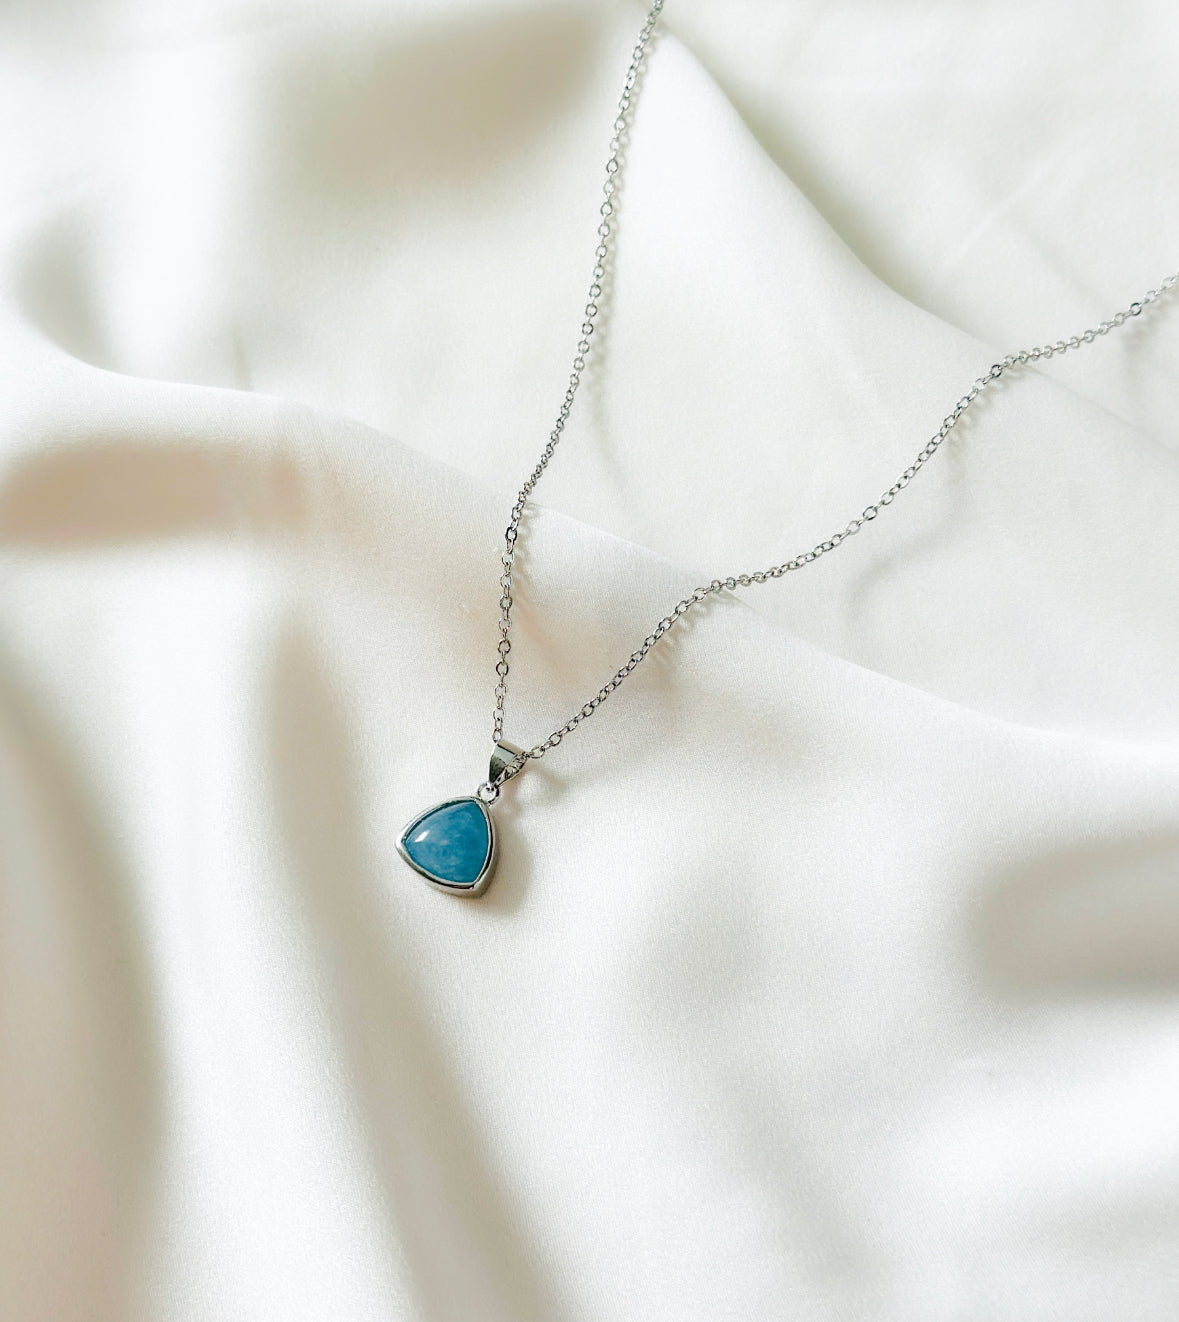 The Azure Necklace